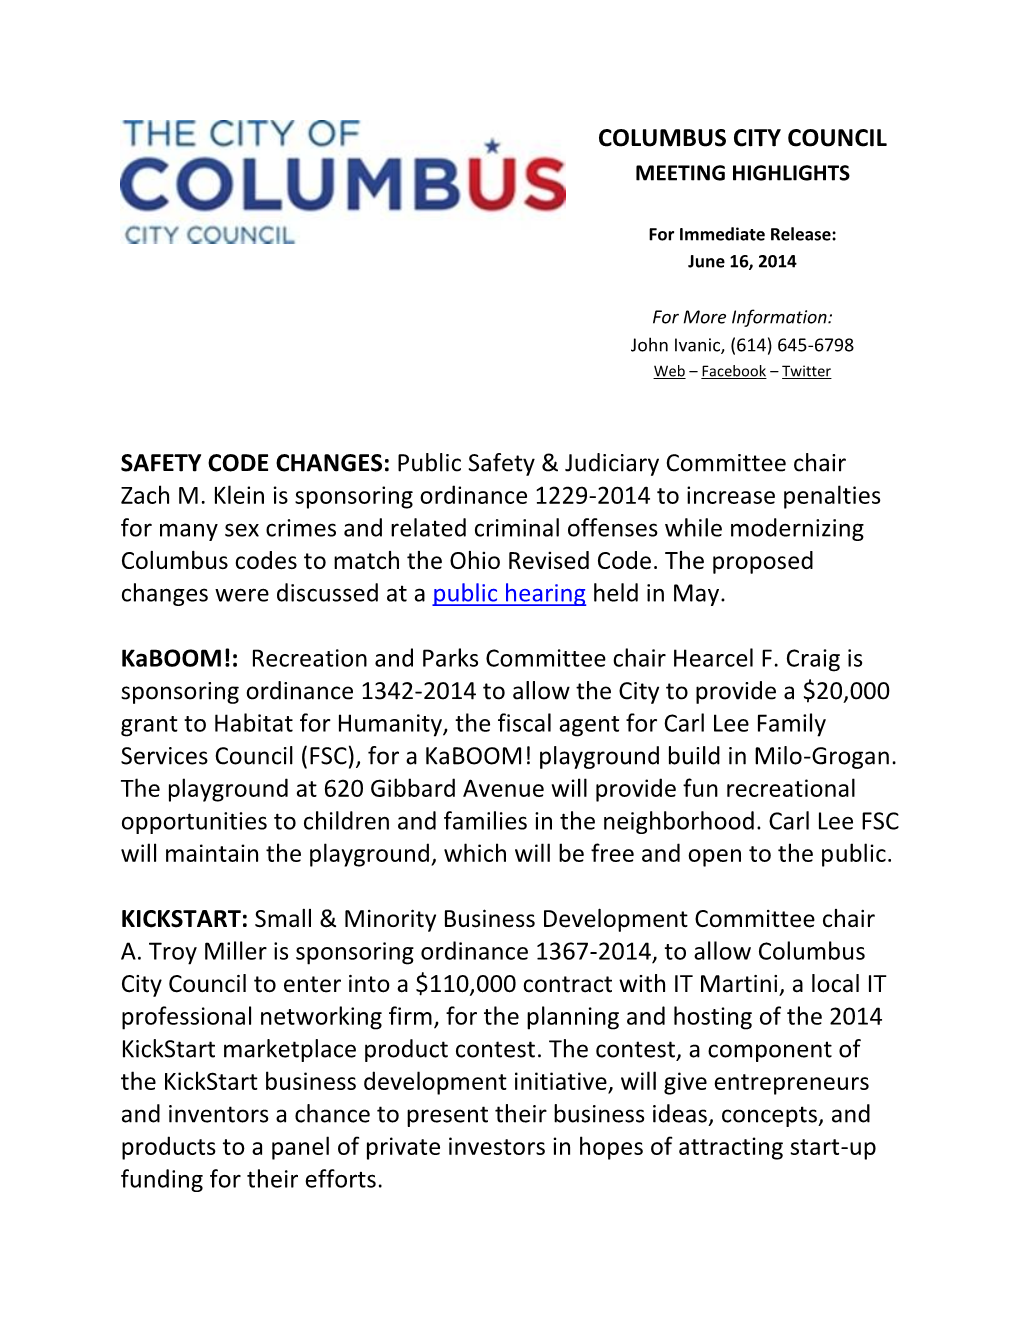 COLUMBUS CITY COUNCIL SAFETY CODE CHANGES: Public Safety